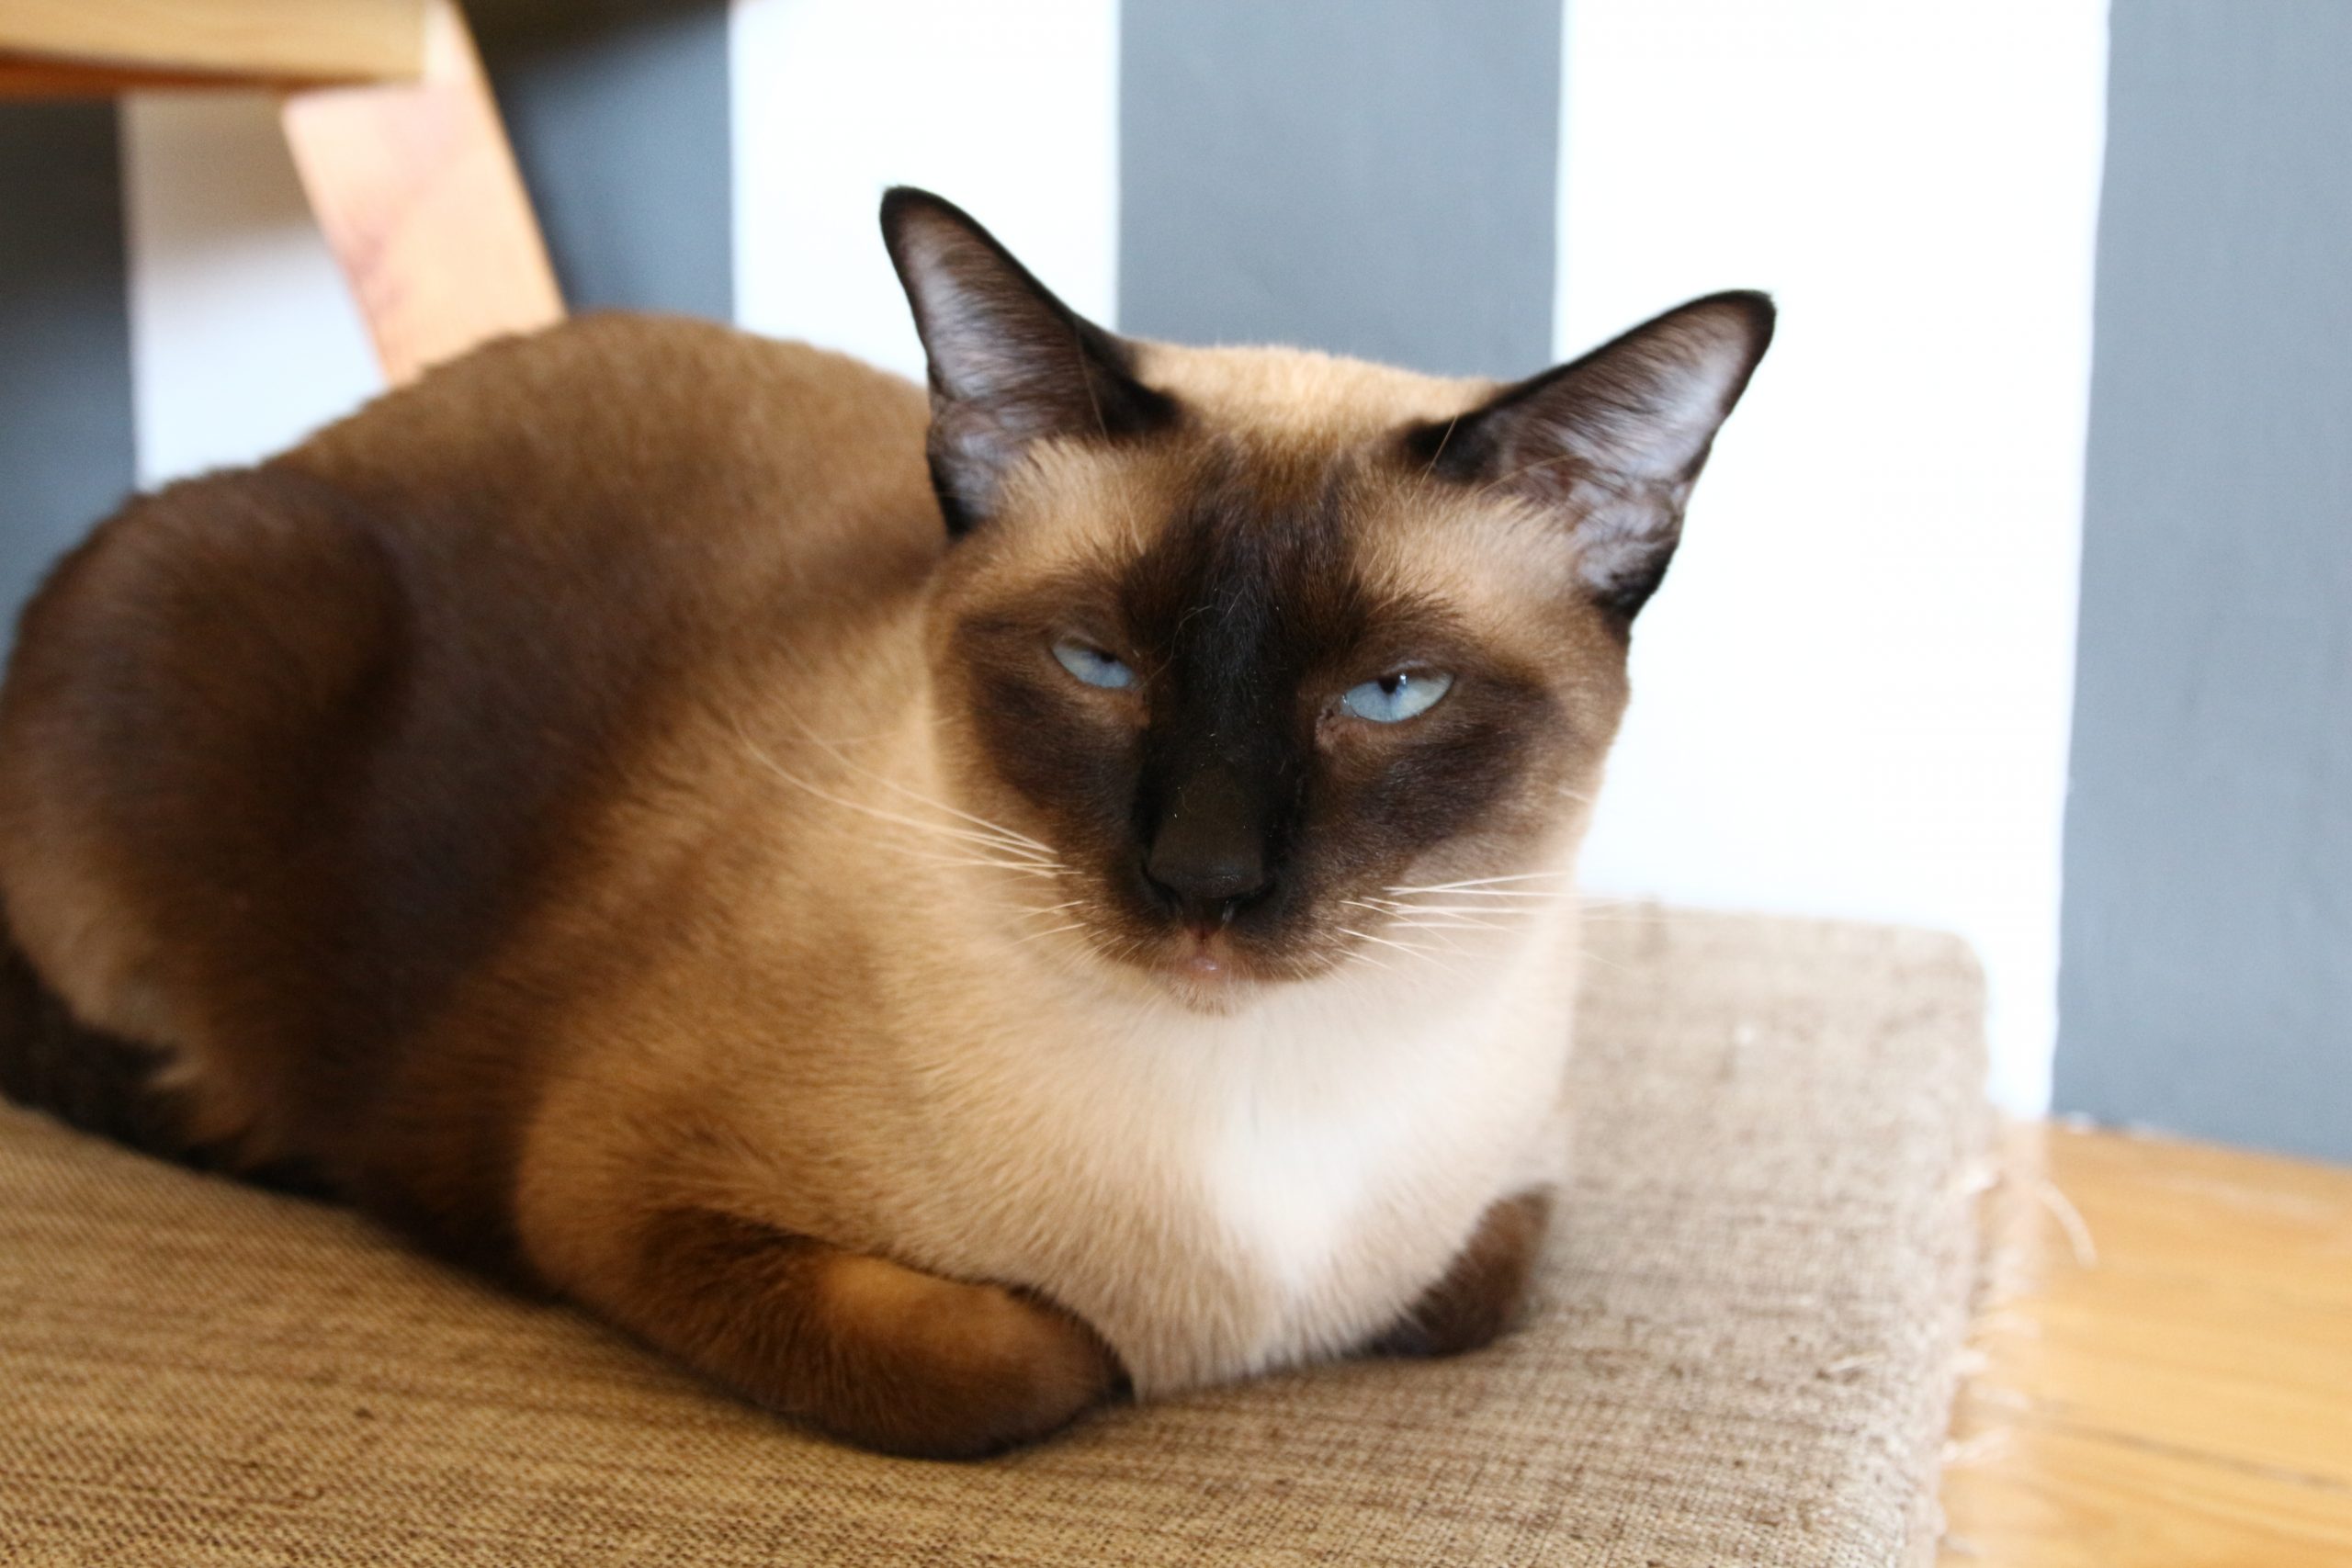 Siamese cats are predisposed to developing hyperthyroidism.